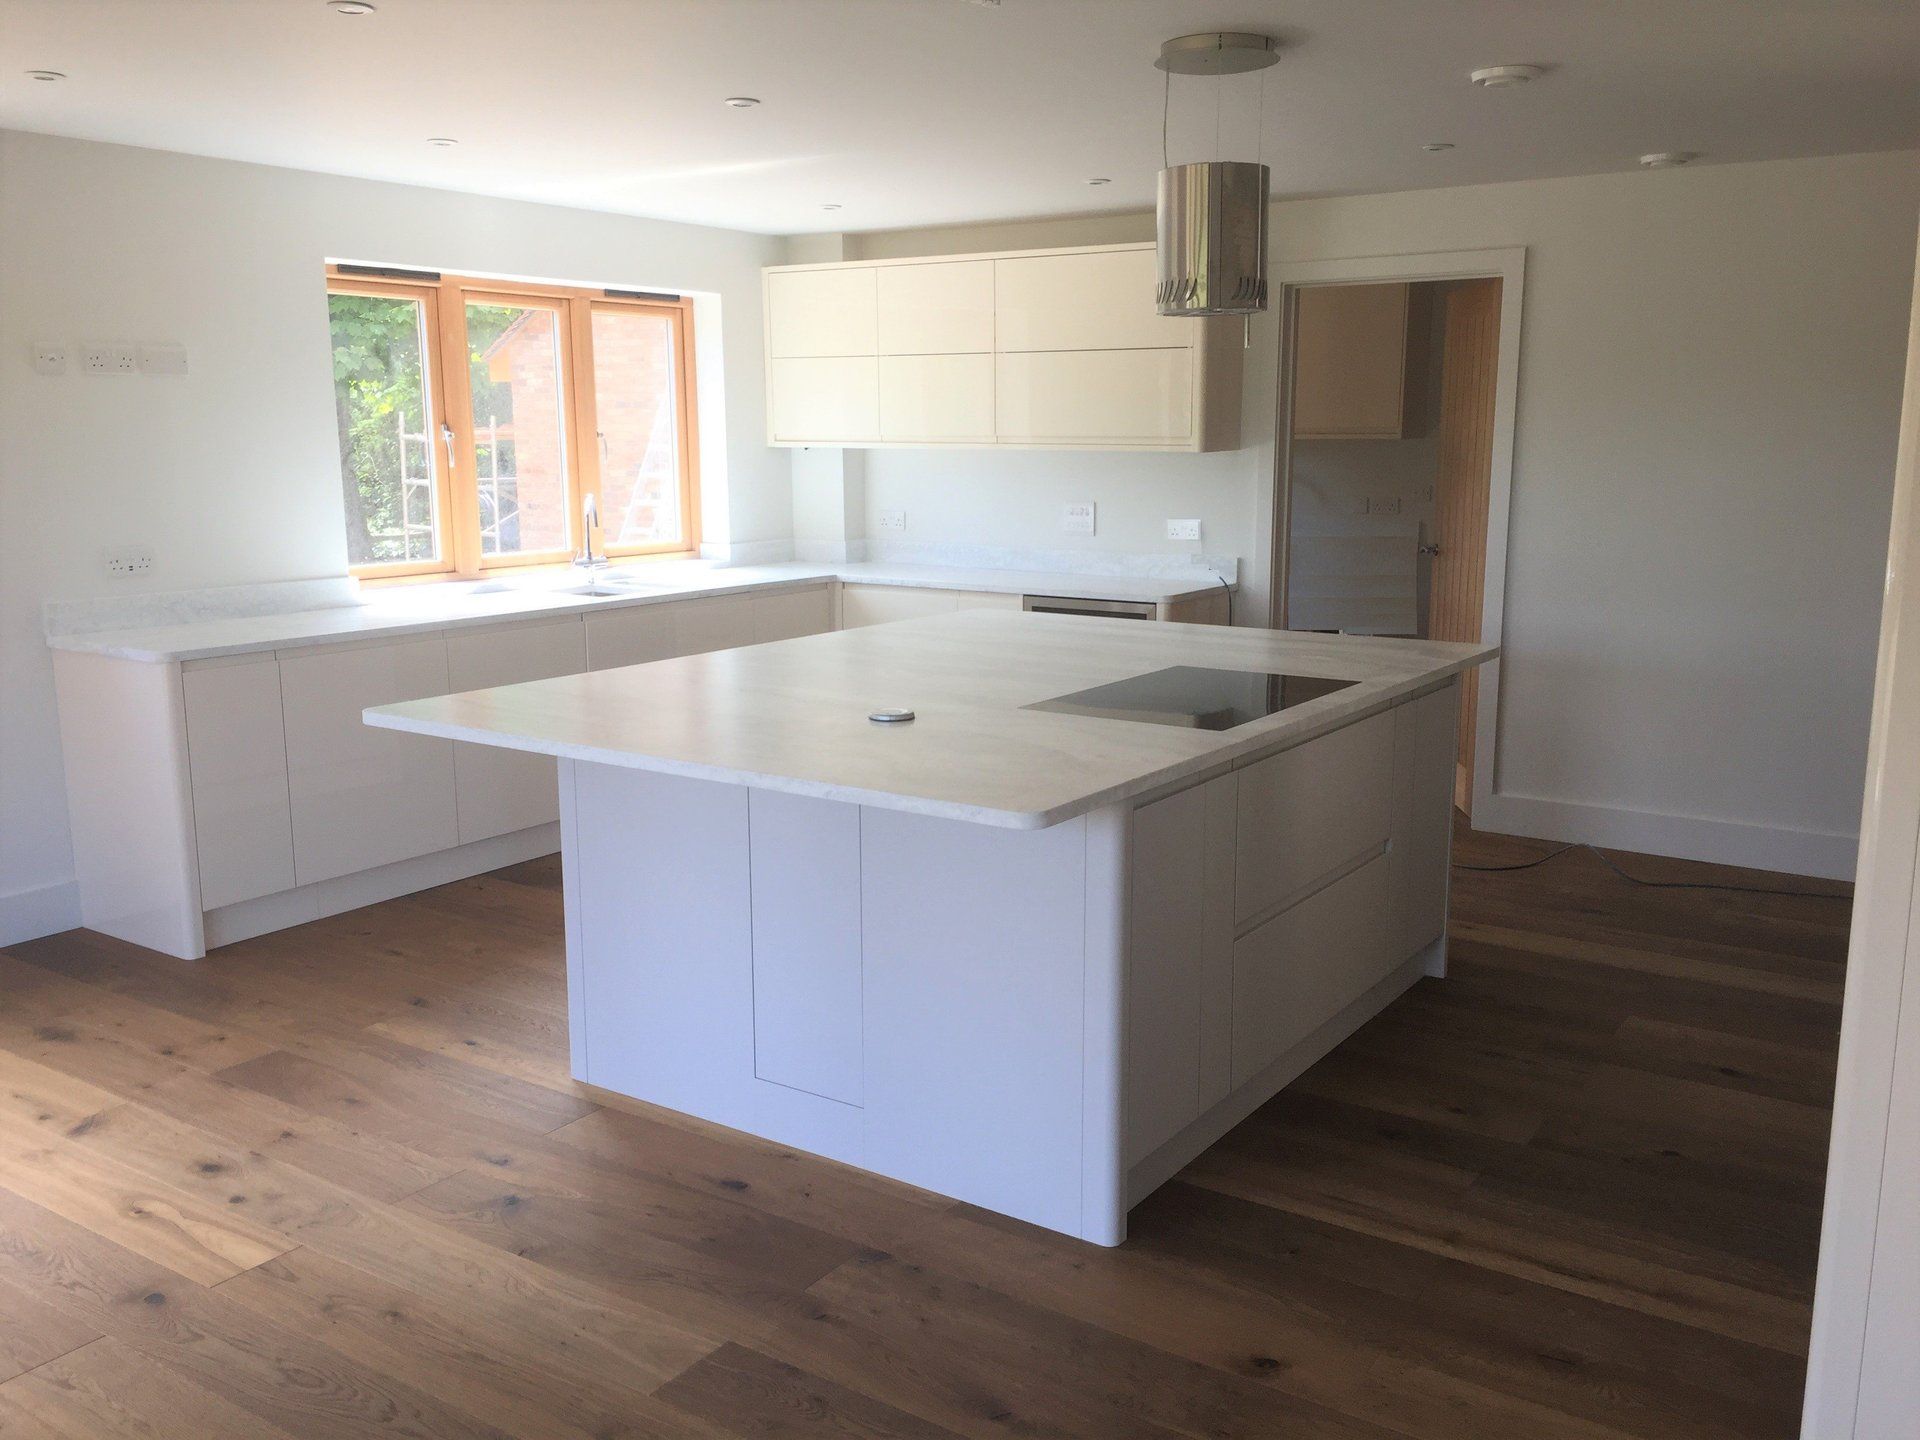 Kitchen installation. Marble top. Builder. Building contractor. Construction. Carpentry. Carpentry contractor. Extensions. New builds. Timber frame fabrication and erection. Design and build. Kitchen installations. Horsham. Surrey. Reigate. Redhill. Dorking. Crawley. West Sussex. Cranleigh.